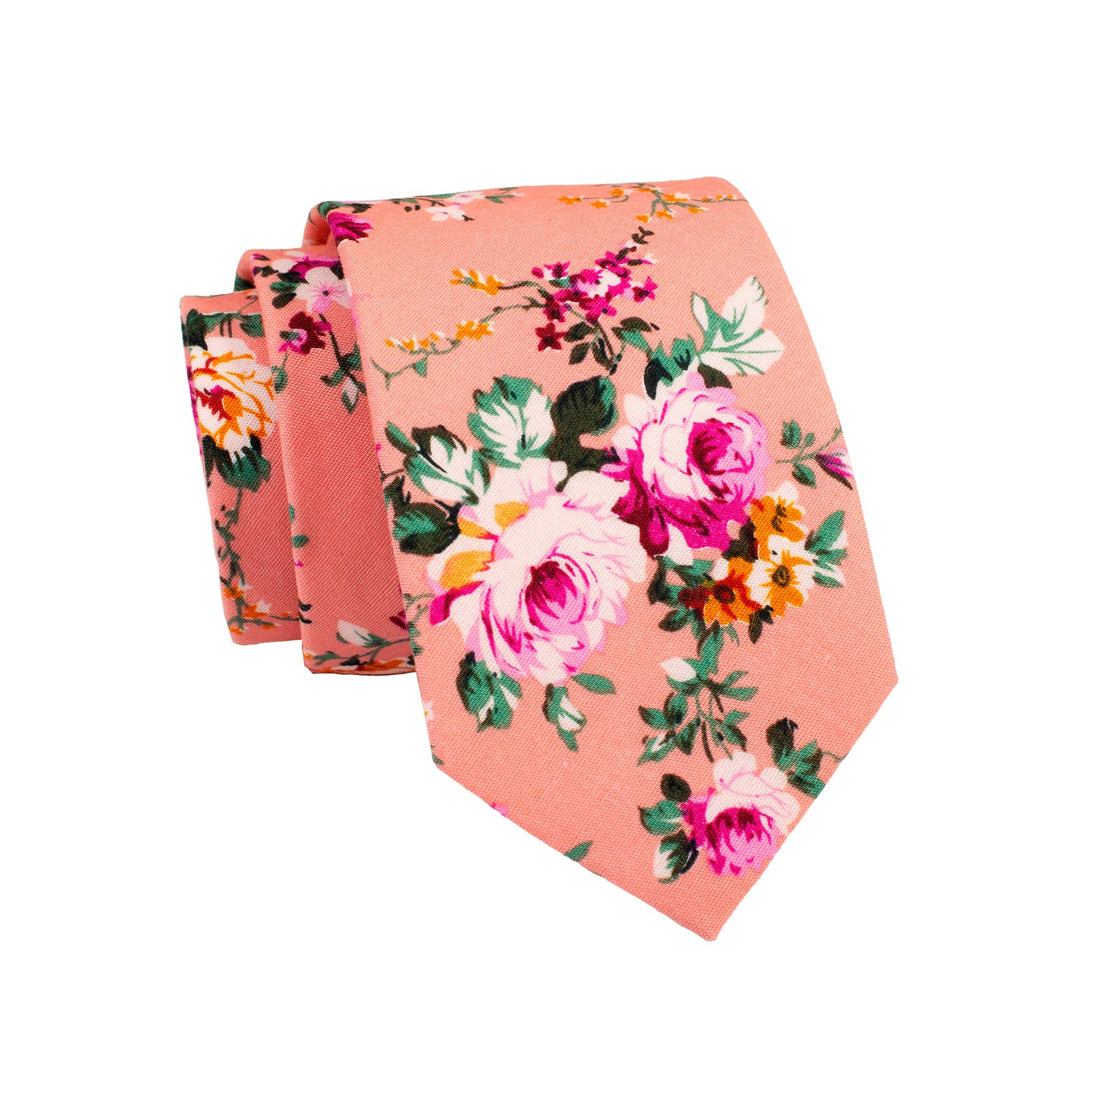 Salmon, Pink & Green Floral Cotton Tie